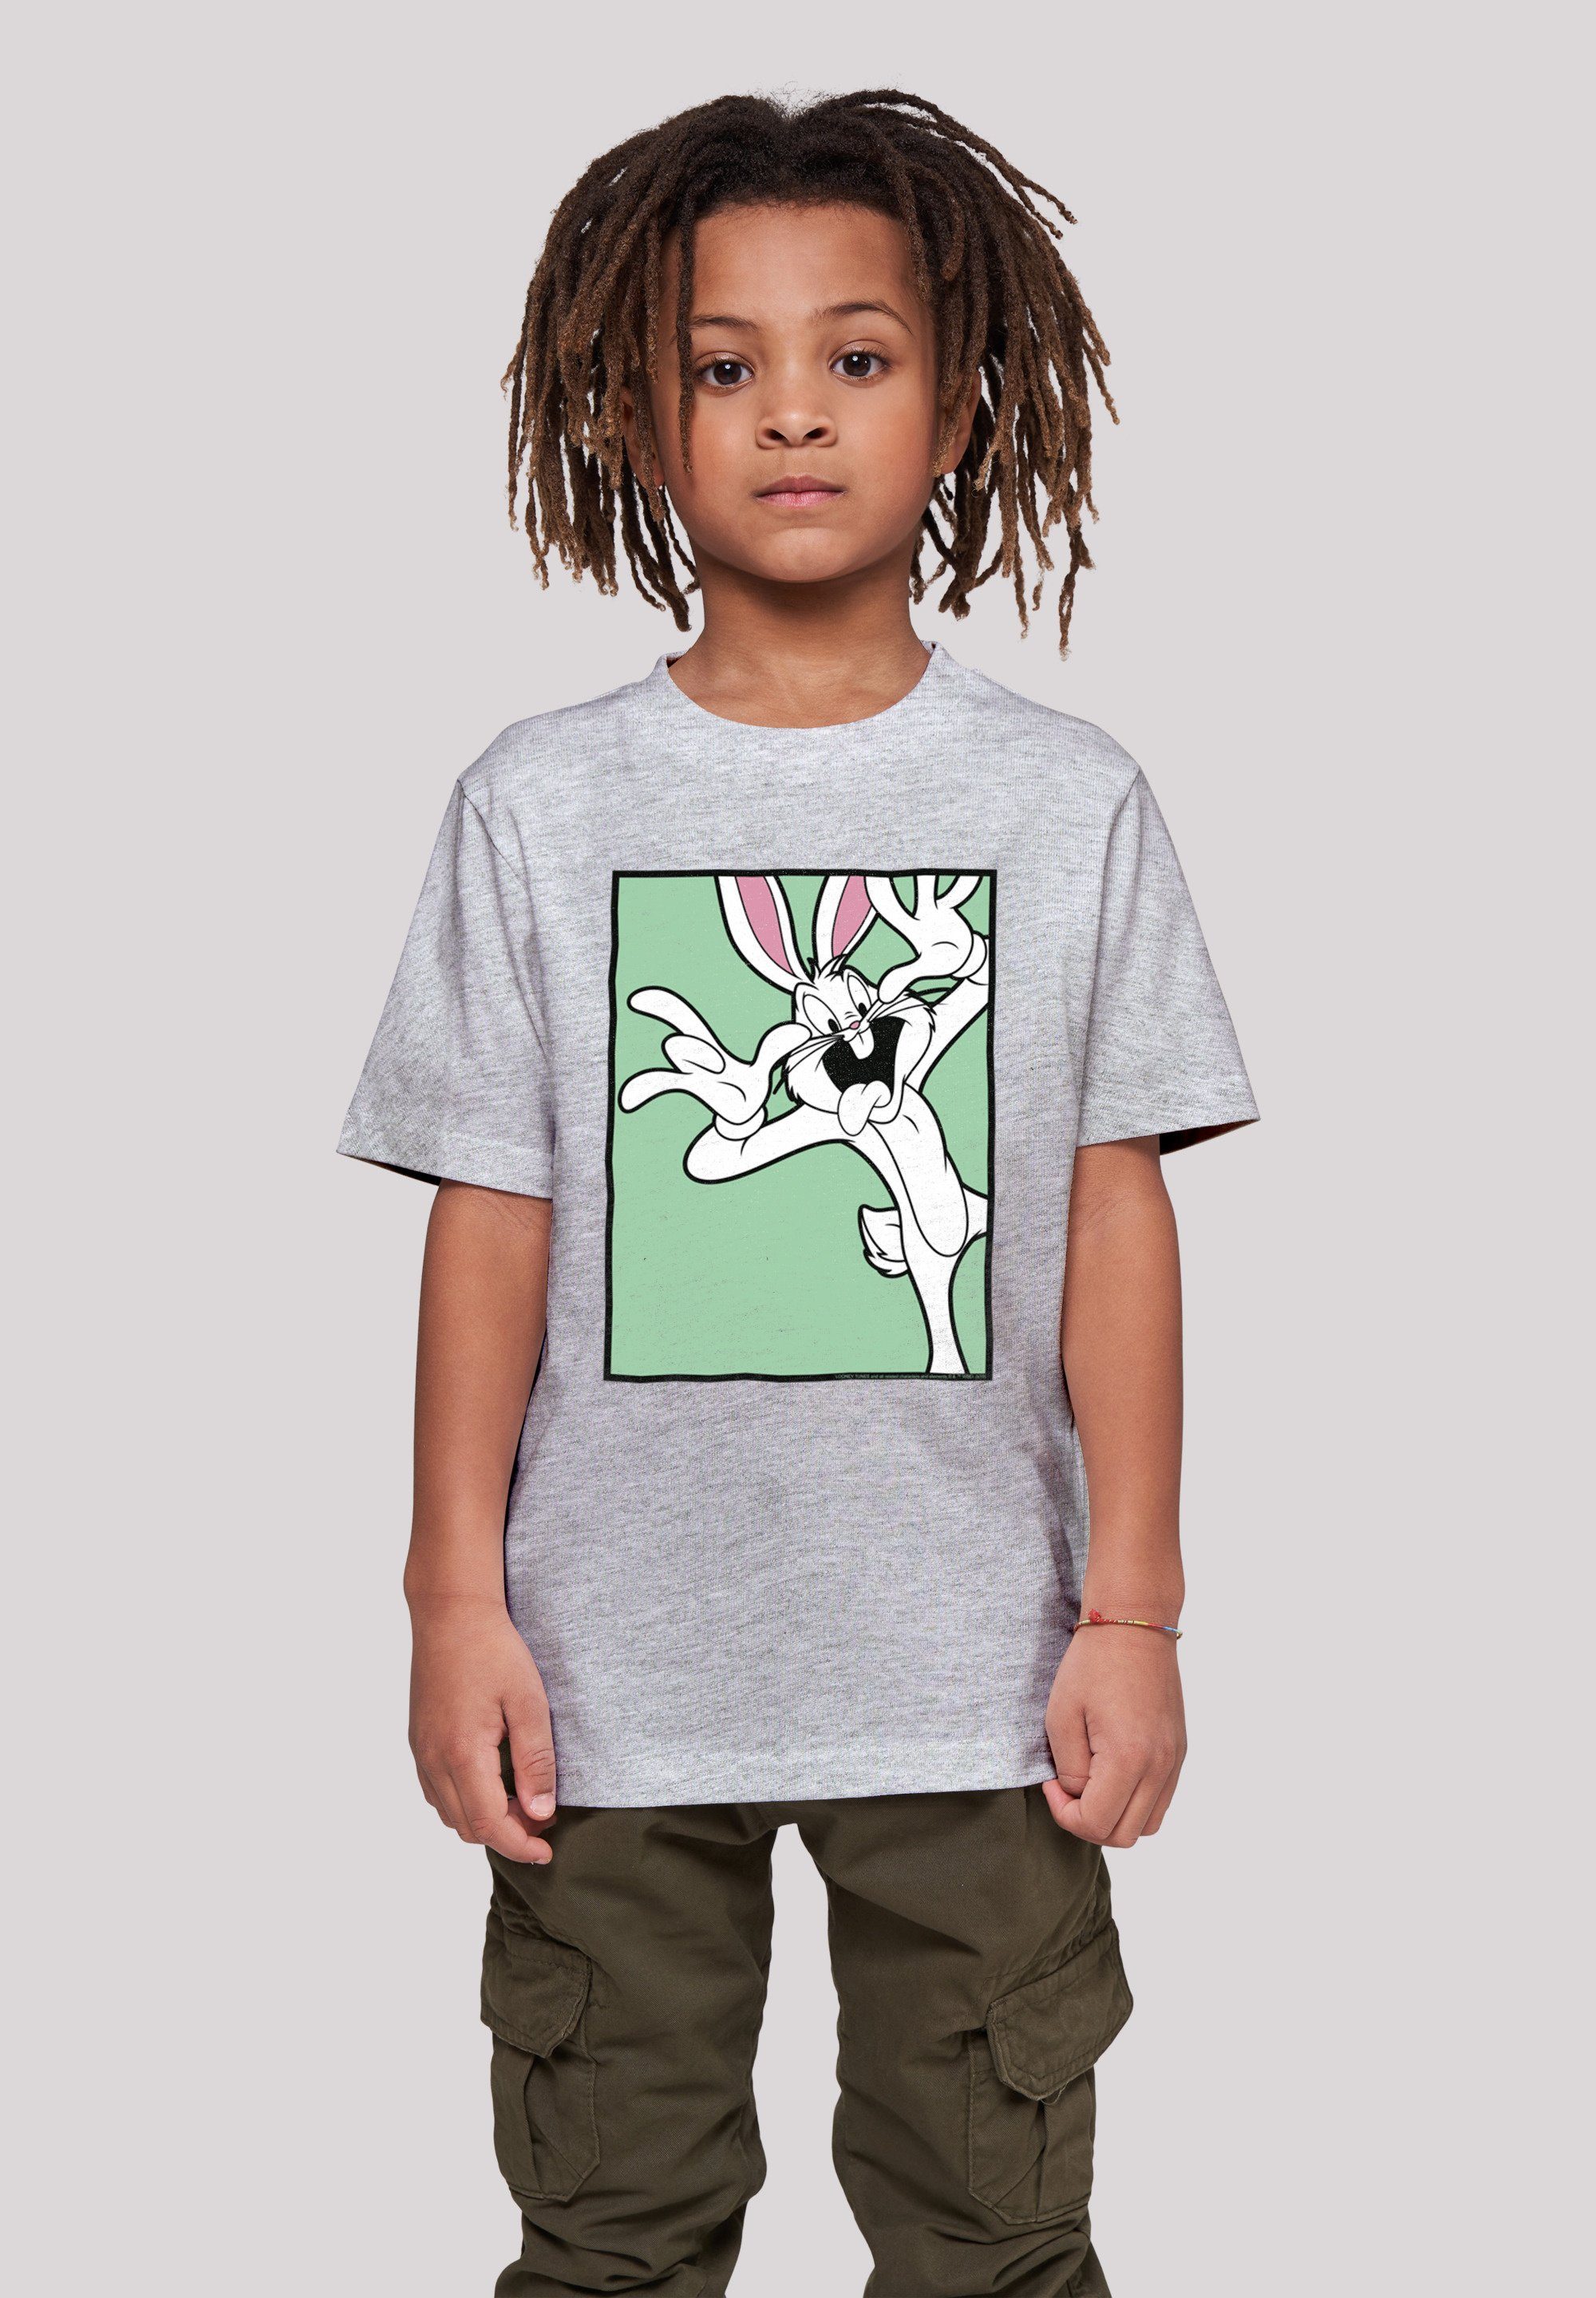 F4NT4STIC T-Shirt Looney Looney lizenziertes T-Shirt Bunny Tunes Print, Tunes Bugs Offiziell Funny Face